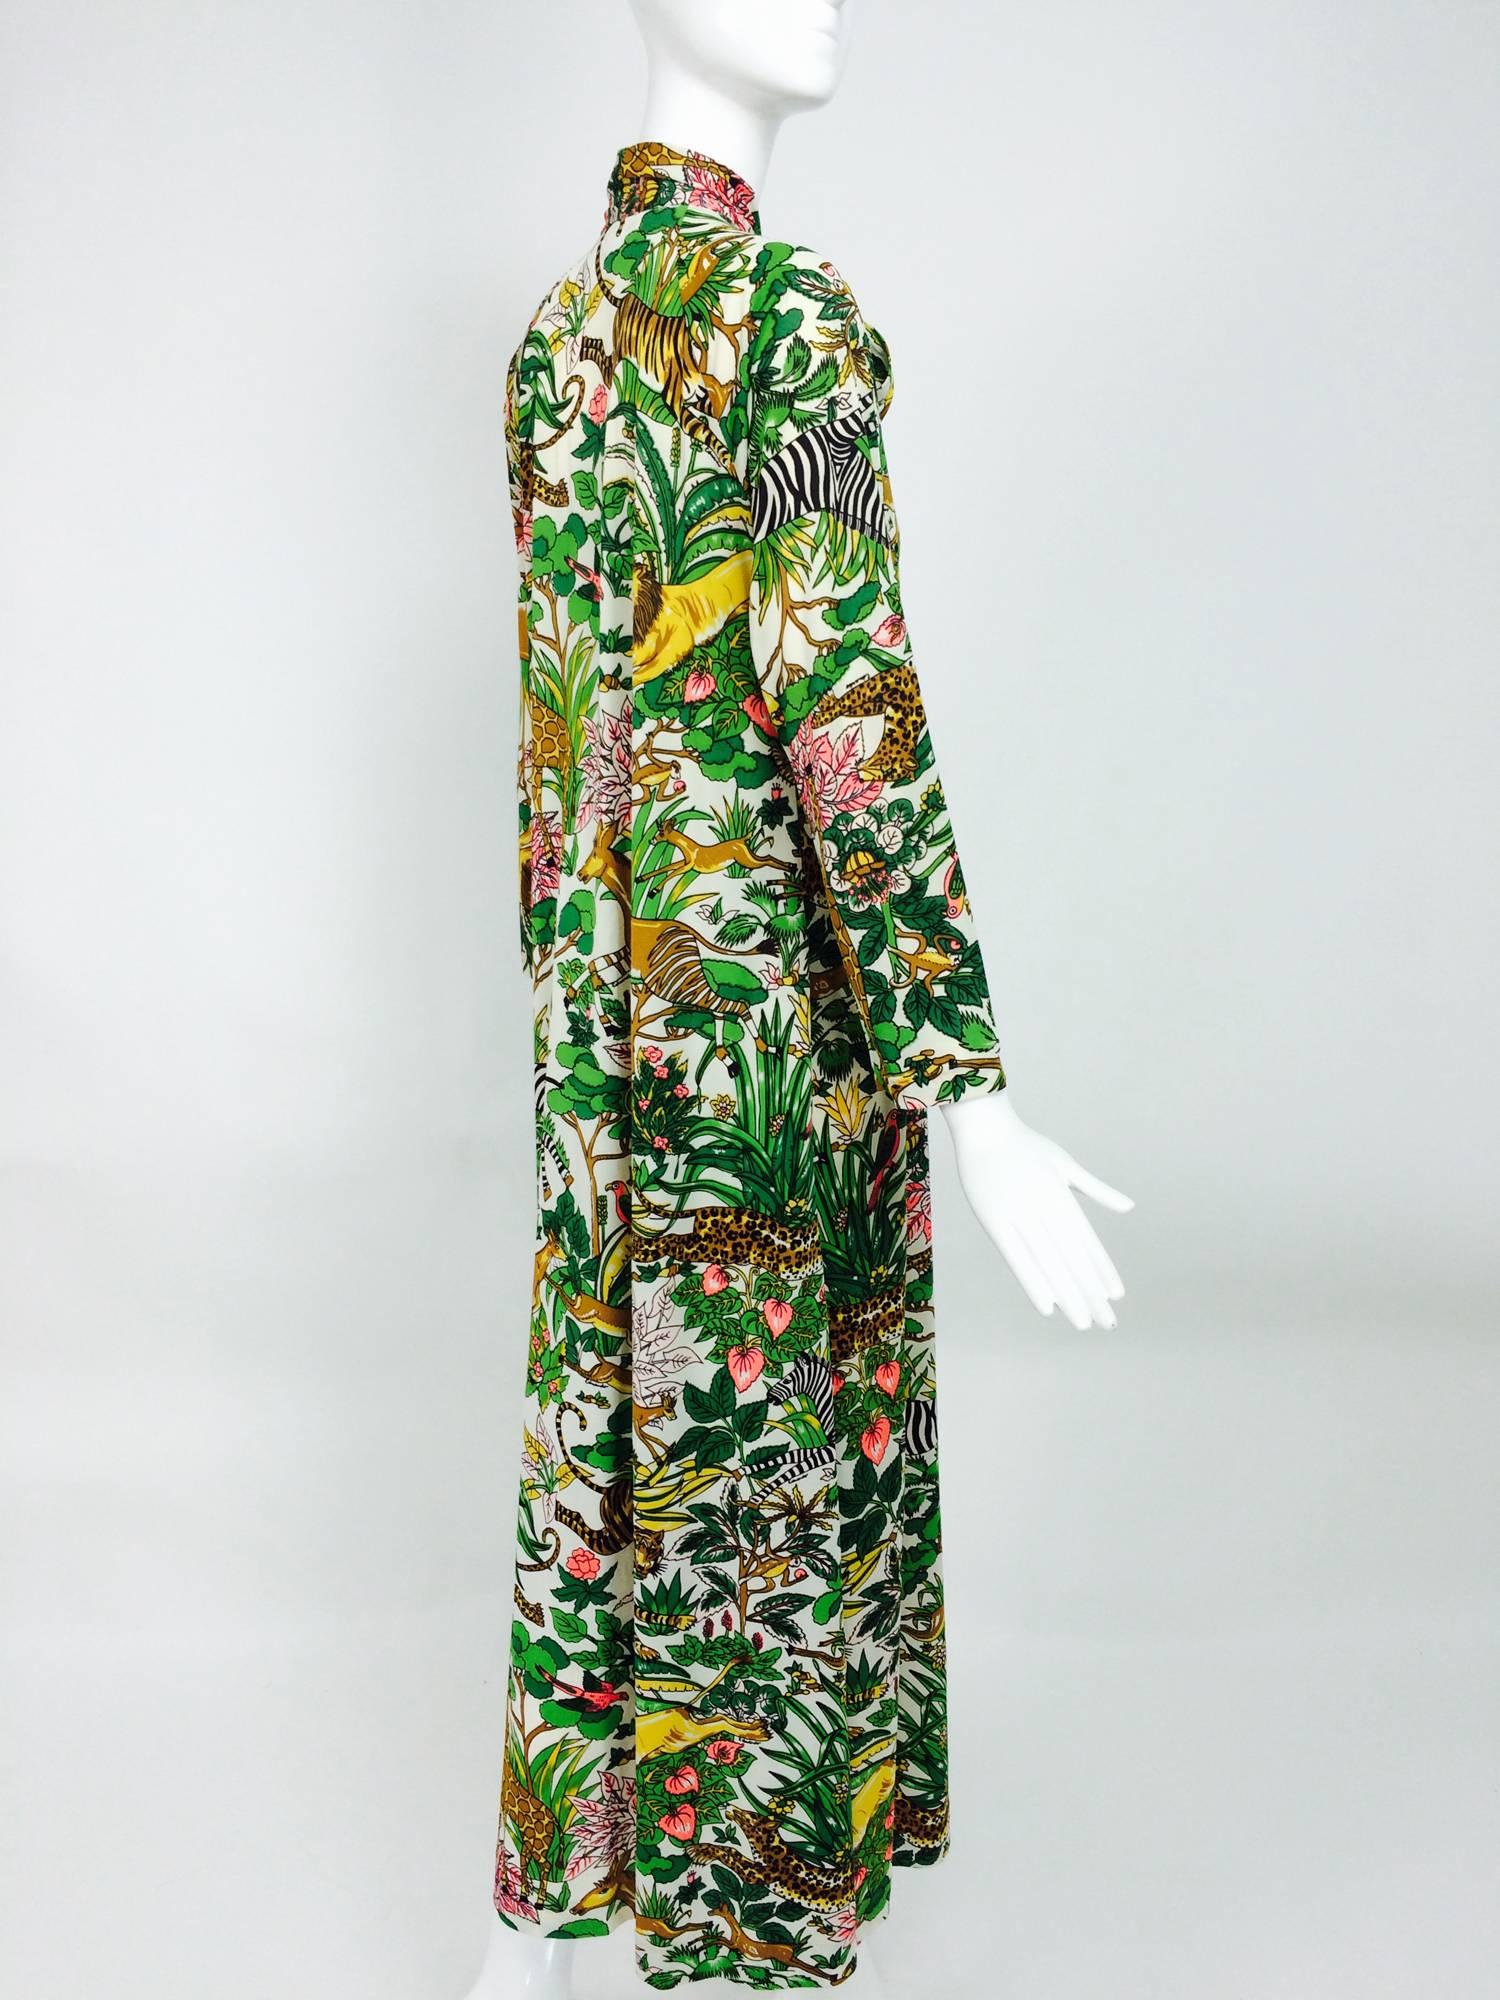 Eduardo Saks 5th Ave. jungle print bow tie lounge maxi dress1970s...Signed "Eduardo" in the print & labeled Saks 5th Ave...Brightly printed with exotic flora & fauna with zebra, lions, tigers, monkeys, leopards, giraffes and